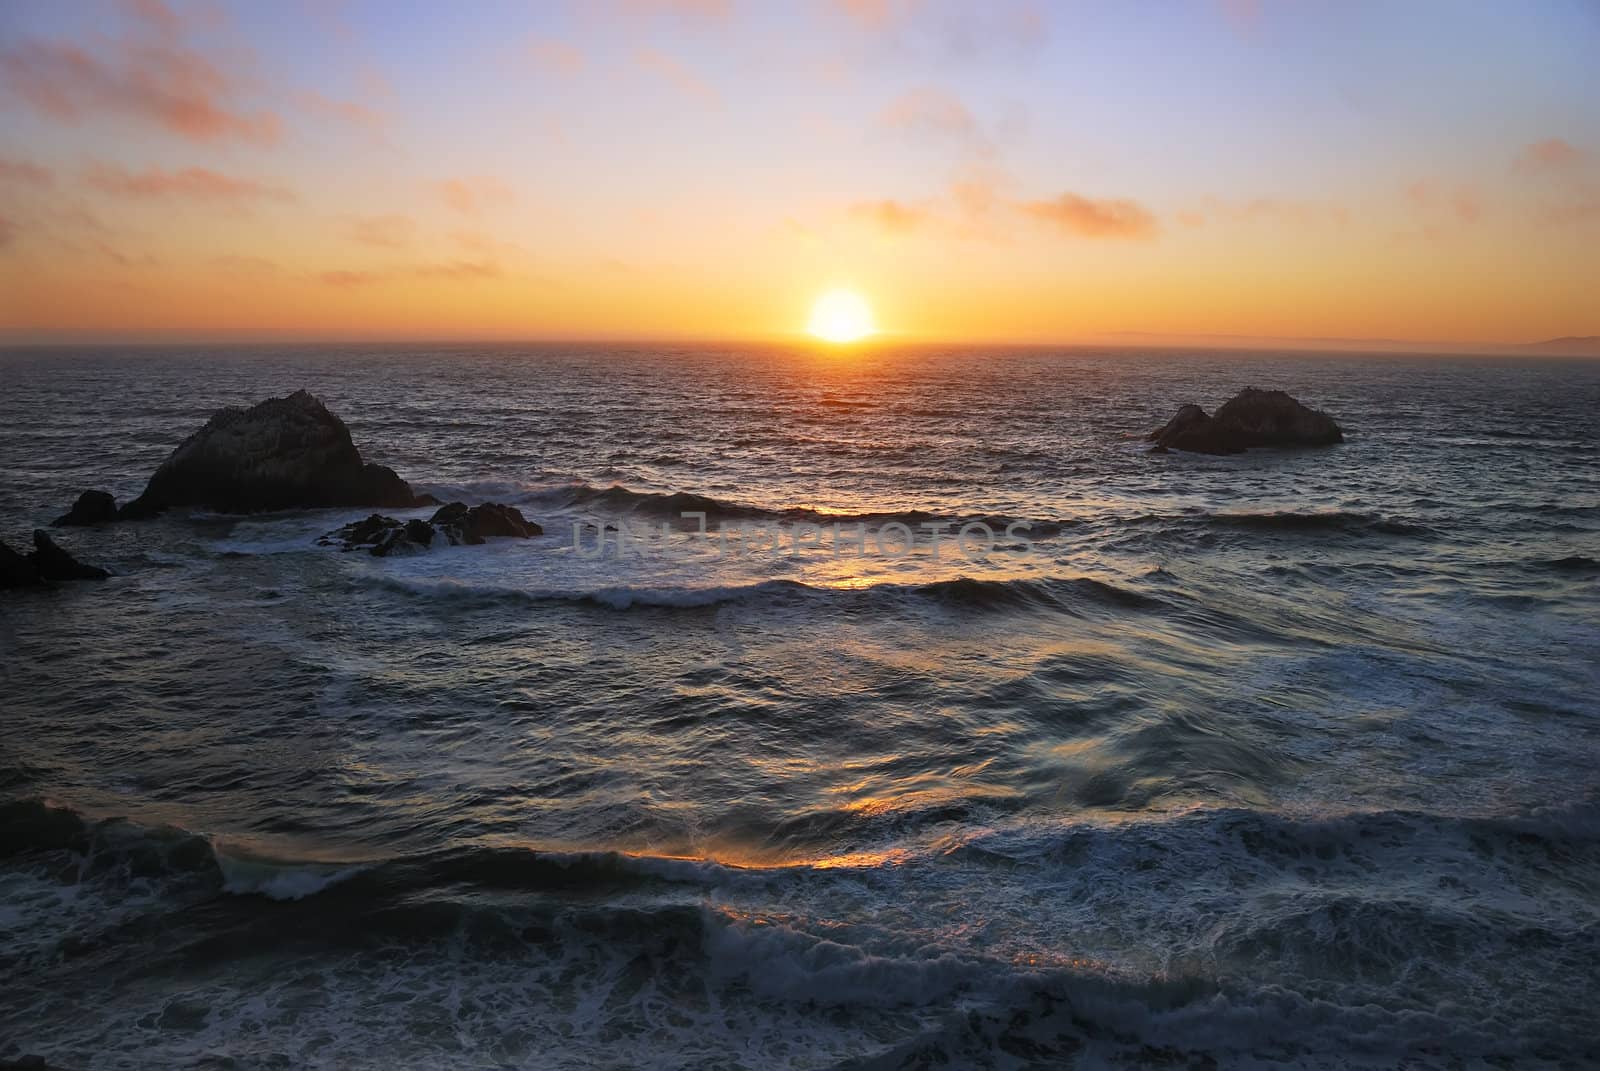 Sunset above the wavy Pacific as seen from the Ocean Beach in San Francisco, California.